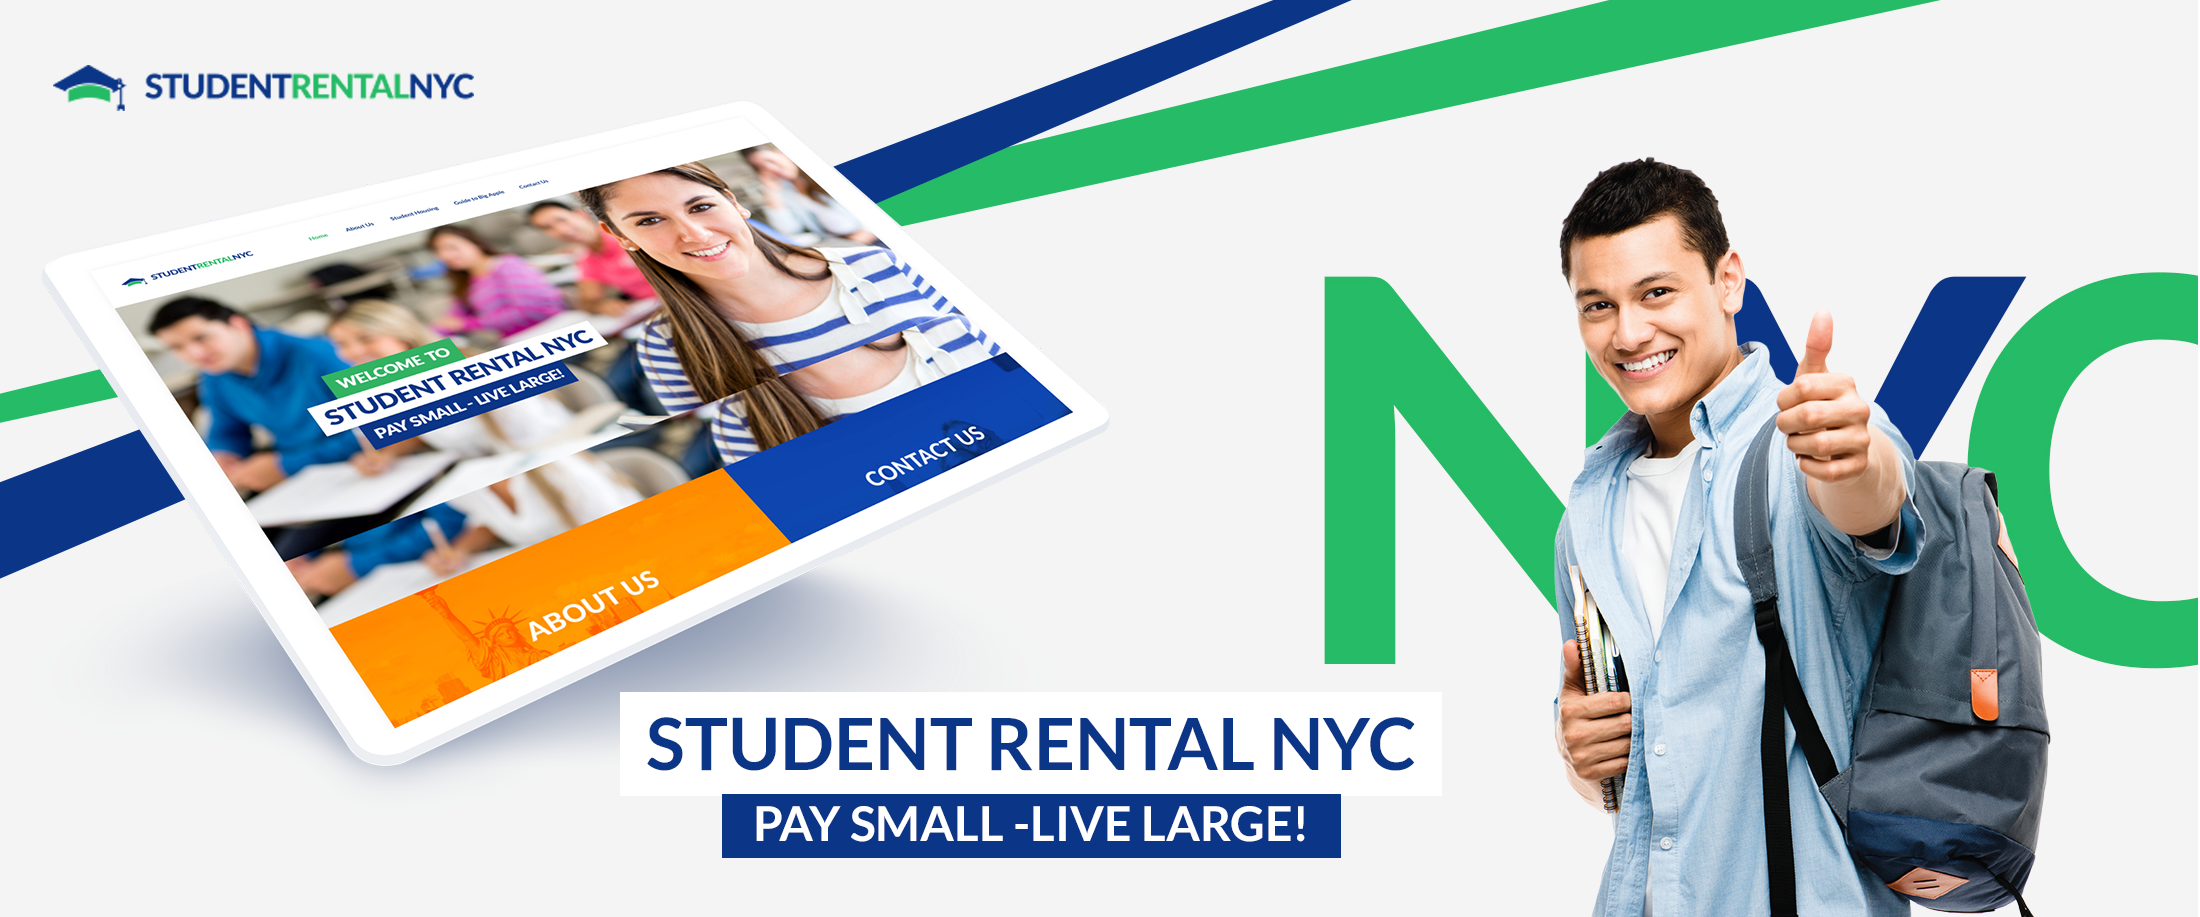 Student Rental NYC banner